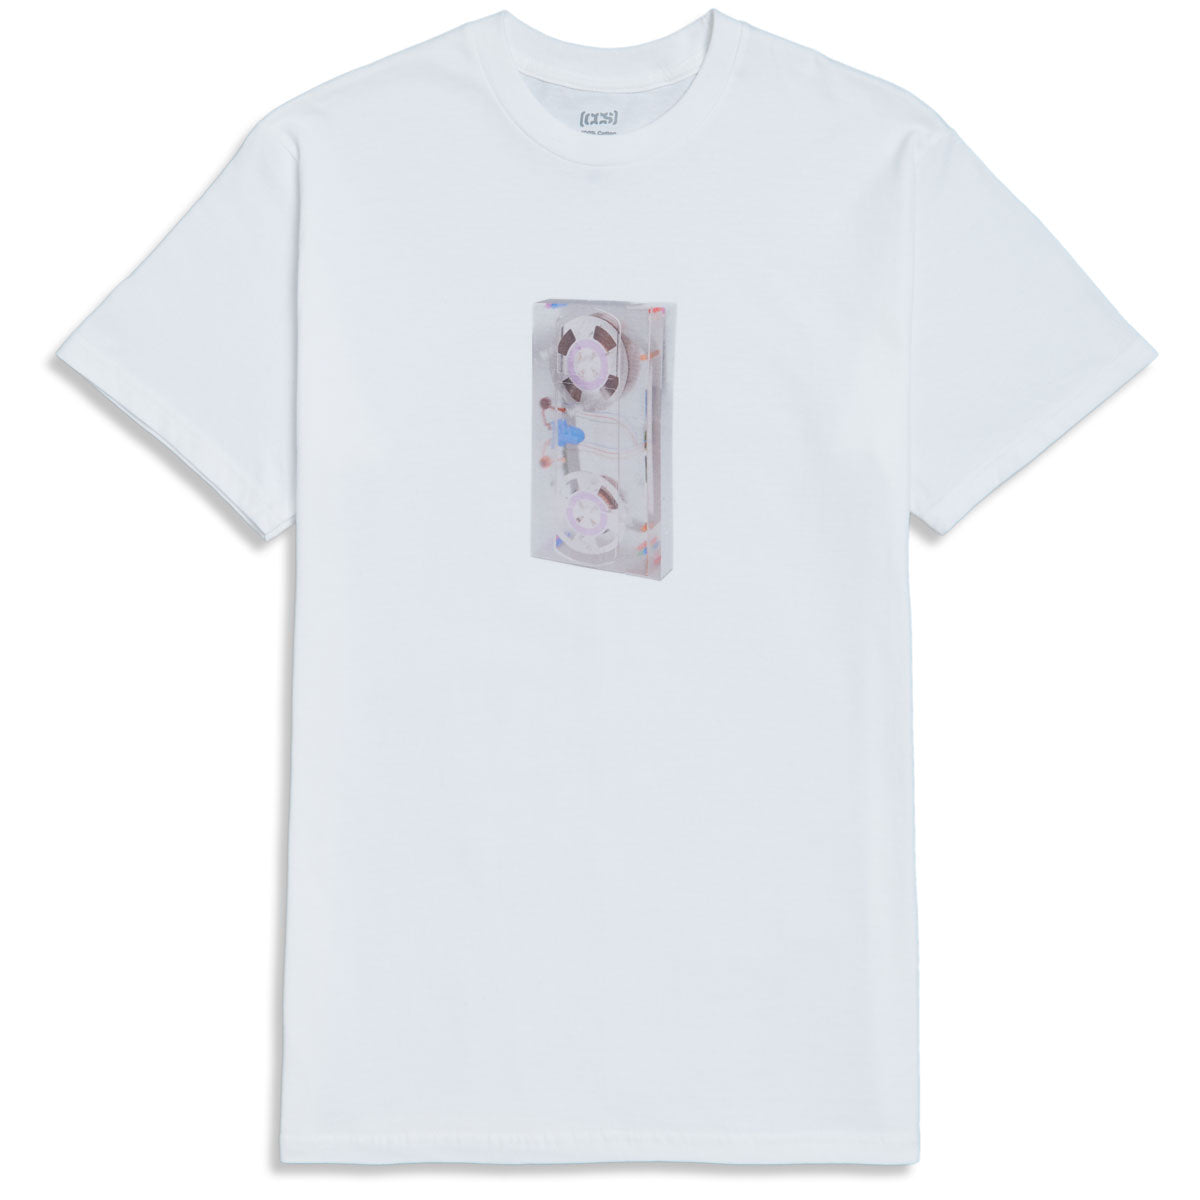 CCS Going Clear VHS T-Shirt - White - XL image 1